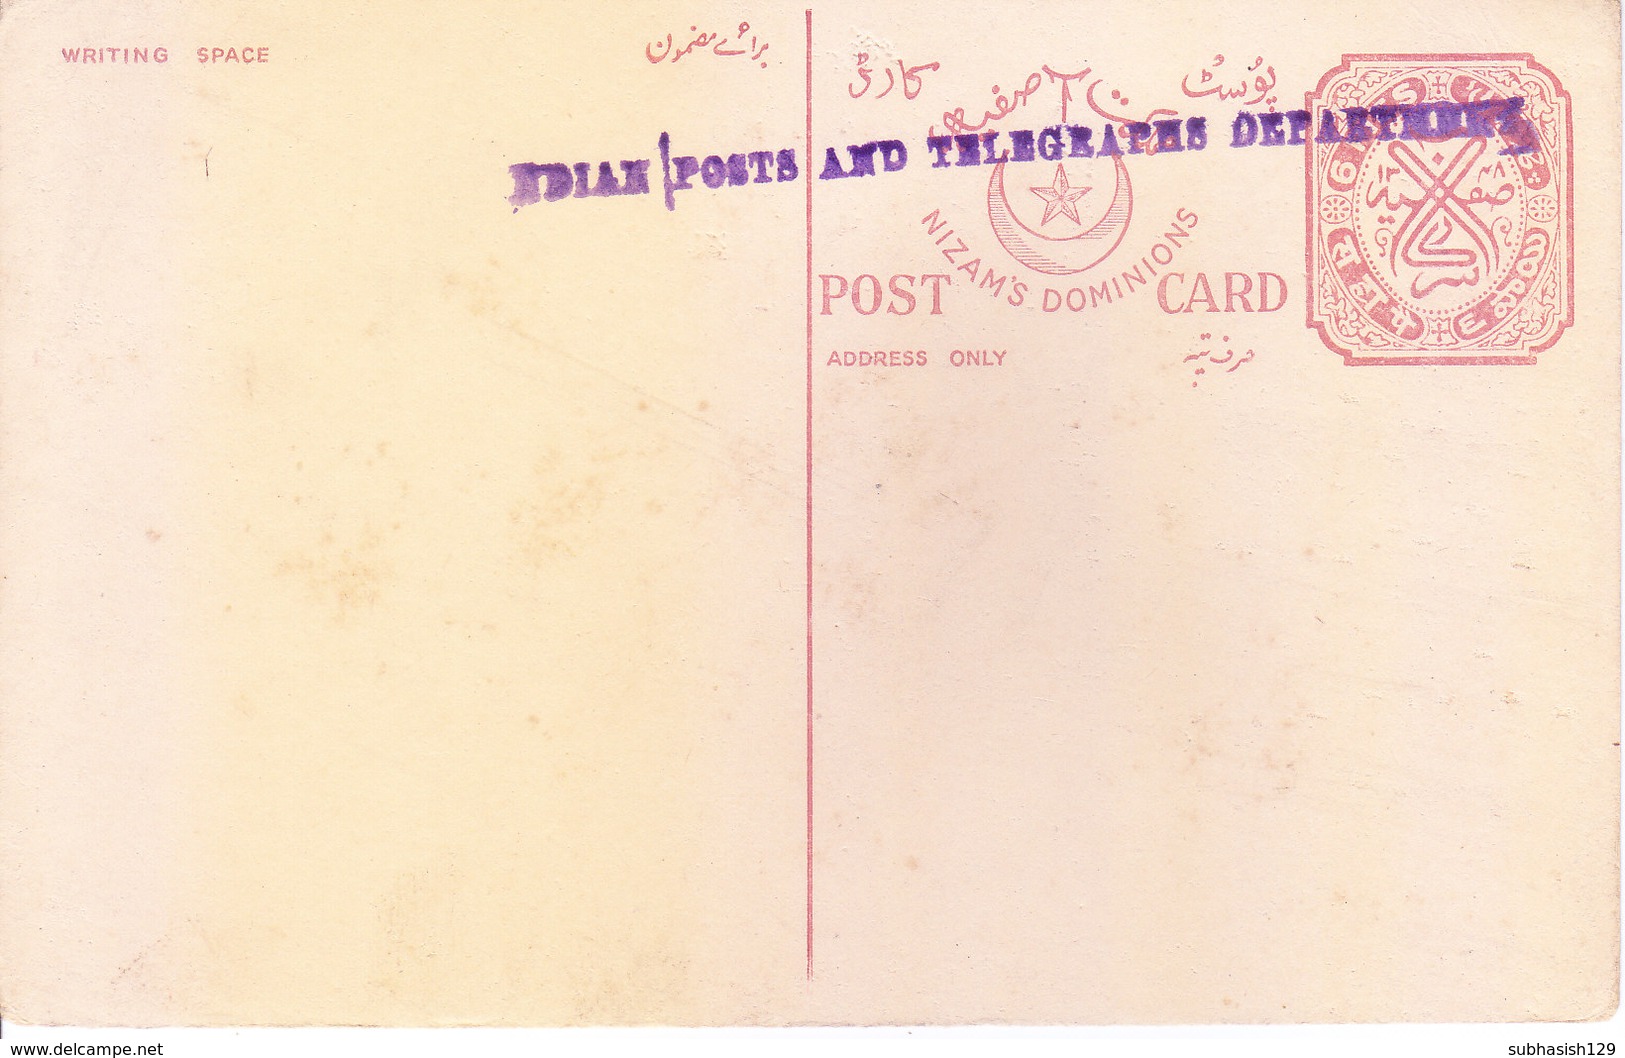 INDIA - POST CARD OF HYDERABAD STATE OVERPRINTED WITH INDIAN POSTS AND TELEGRAPH DEPARTMENT - Ongebruikt